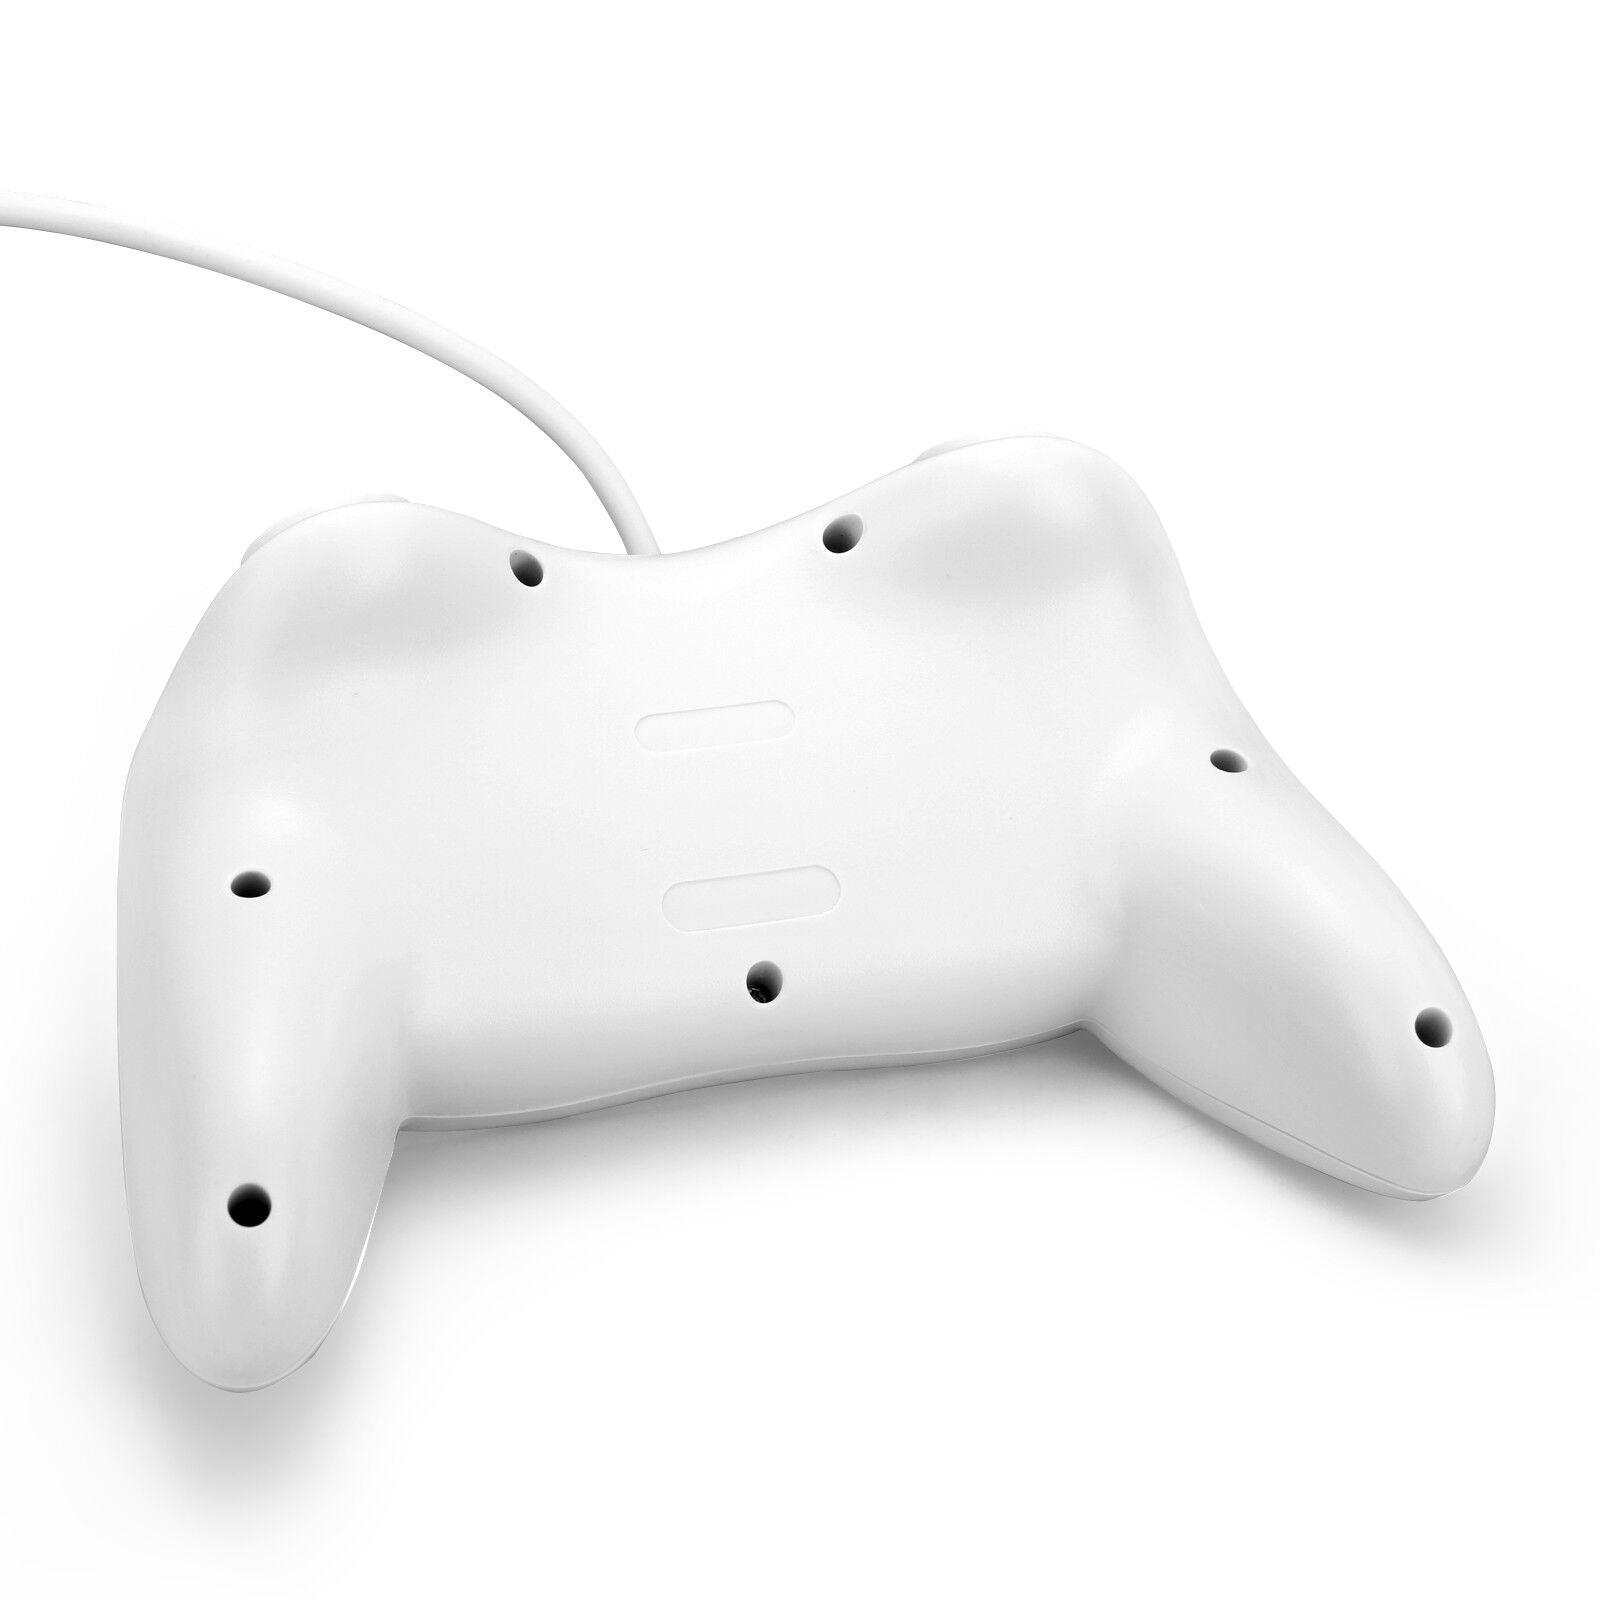 2 New White Classic Pro Wired GamePad Joypad Controller for Nintendo Wii Console - Office Catch